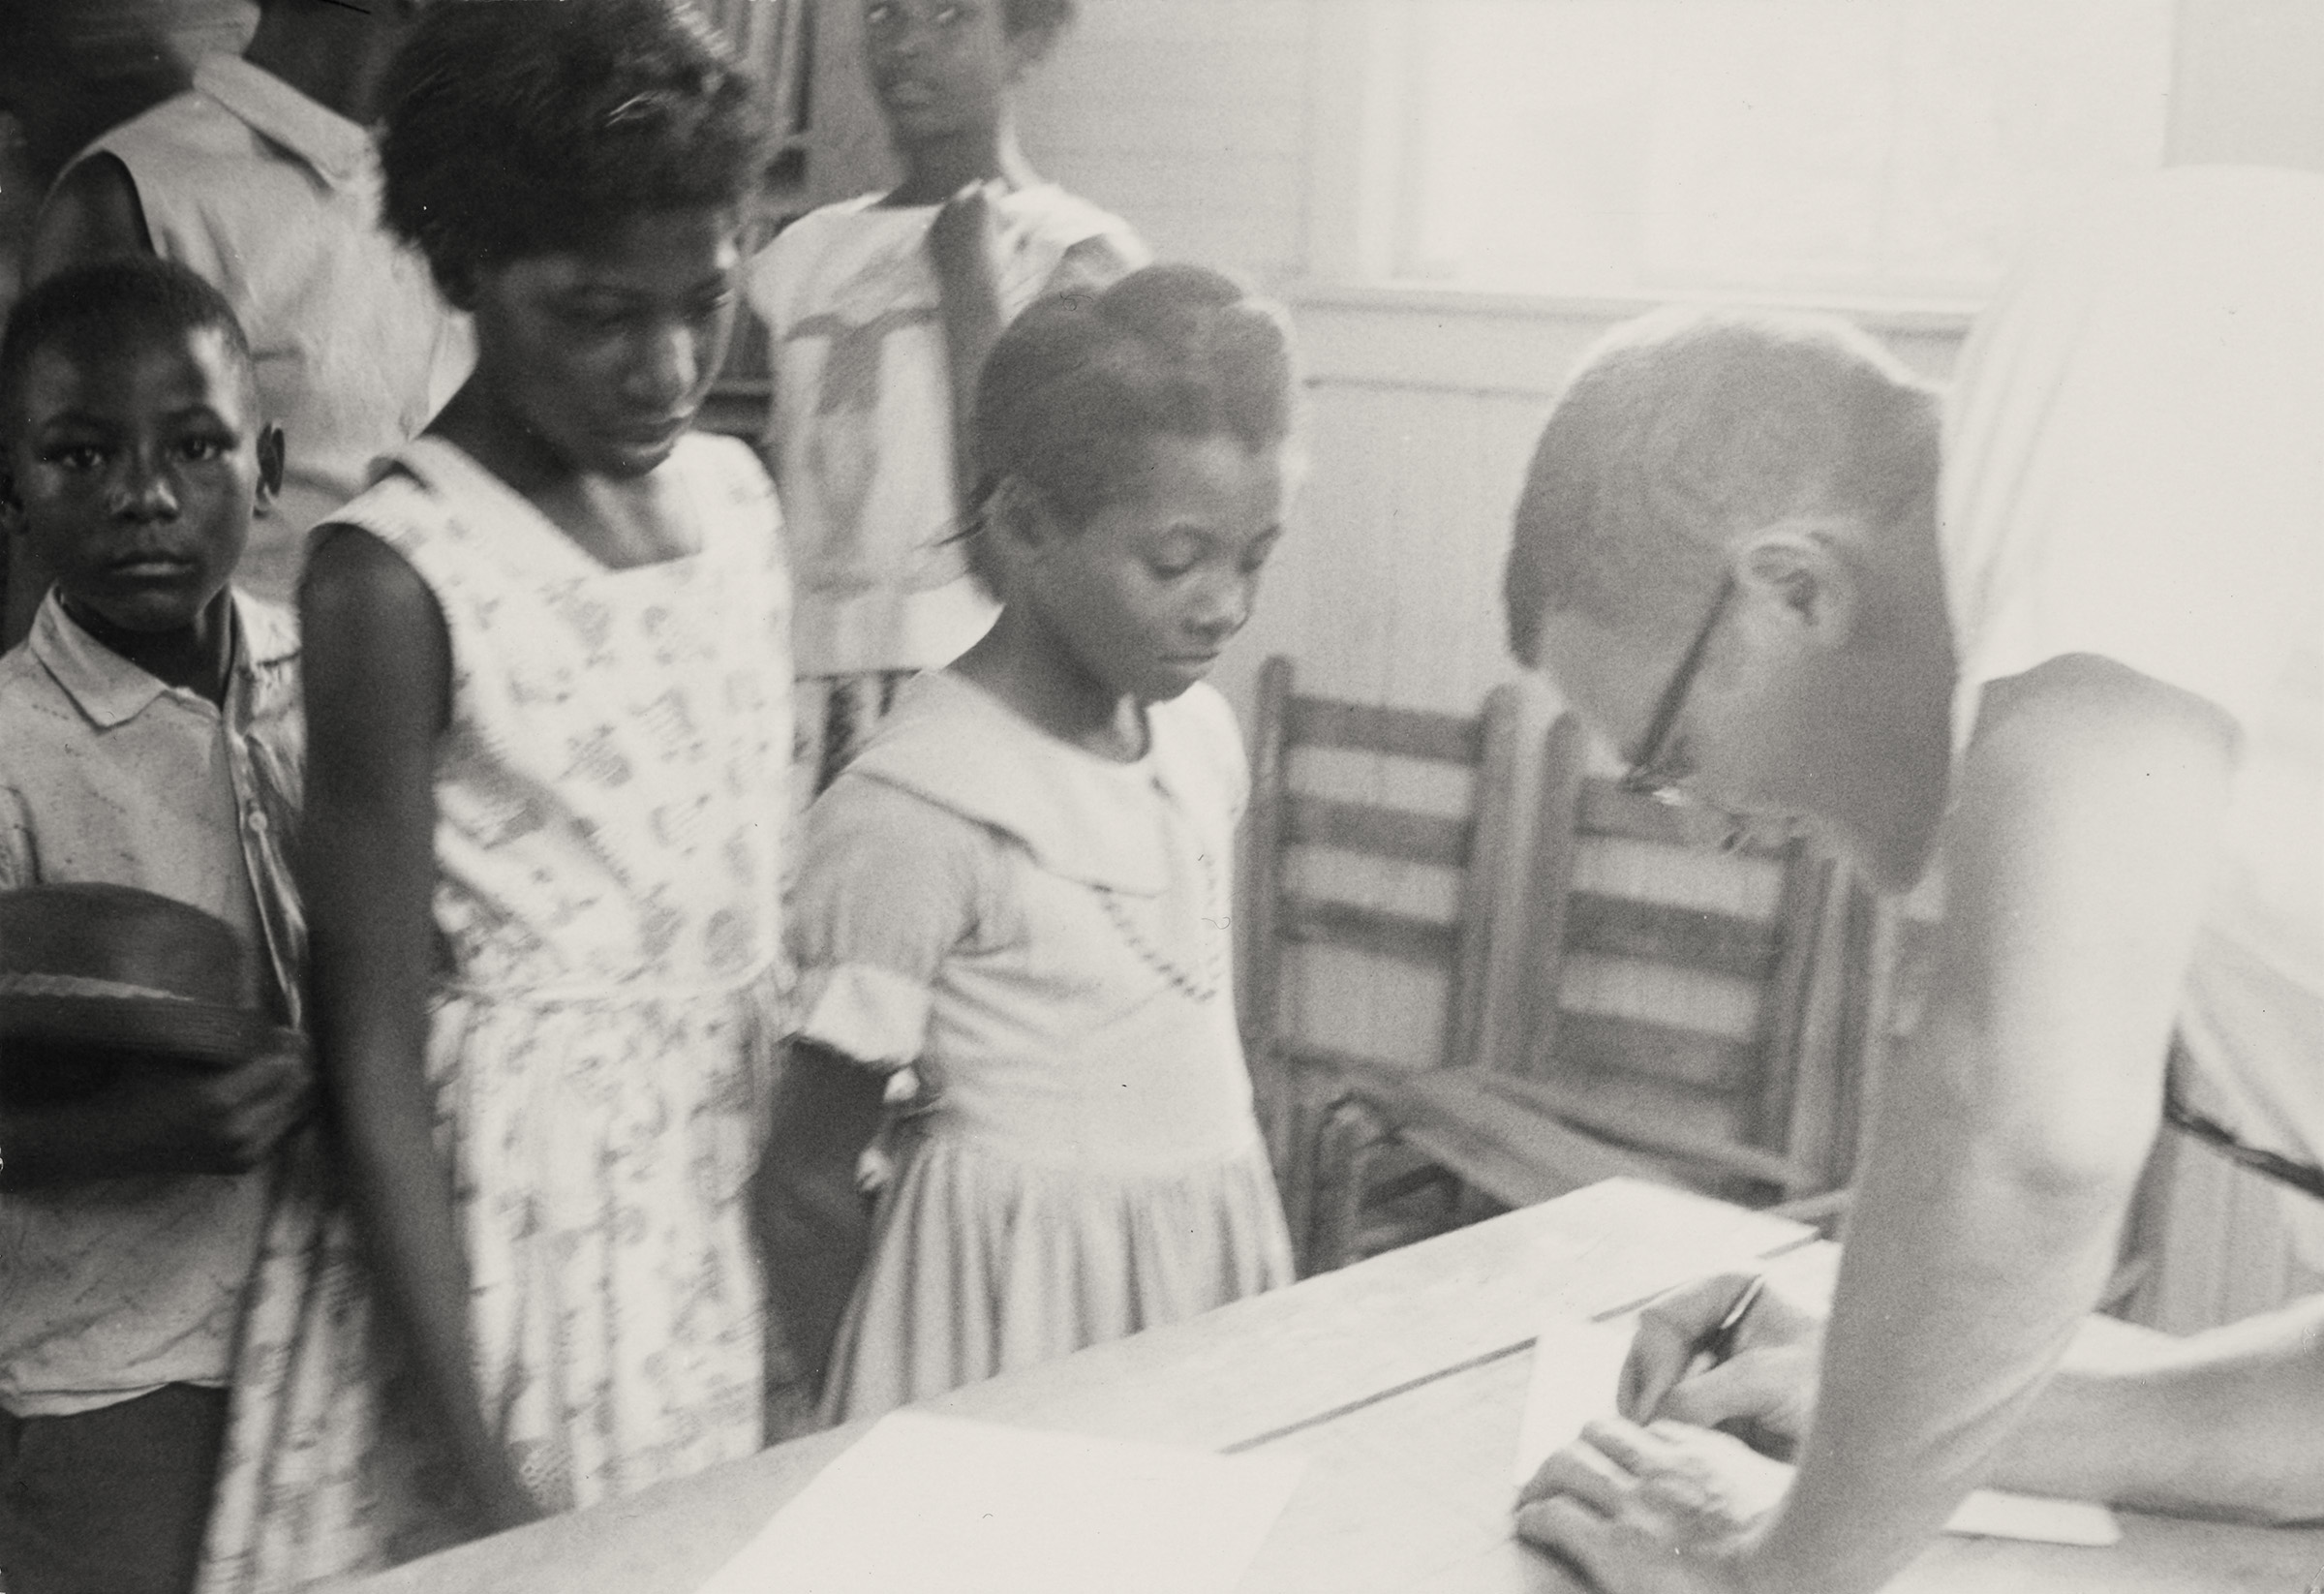 Children Registering for Freedom School, 1964. Photograph by Carol Gross Colca. Children registered for Freedom Schools to learn how to be engaged citizens within their communities and make a difference. Mississippi Freedom Summer Collection, Walter Havighurst Special Collections and University Archives, Miami University Libraries, Oxford OH.